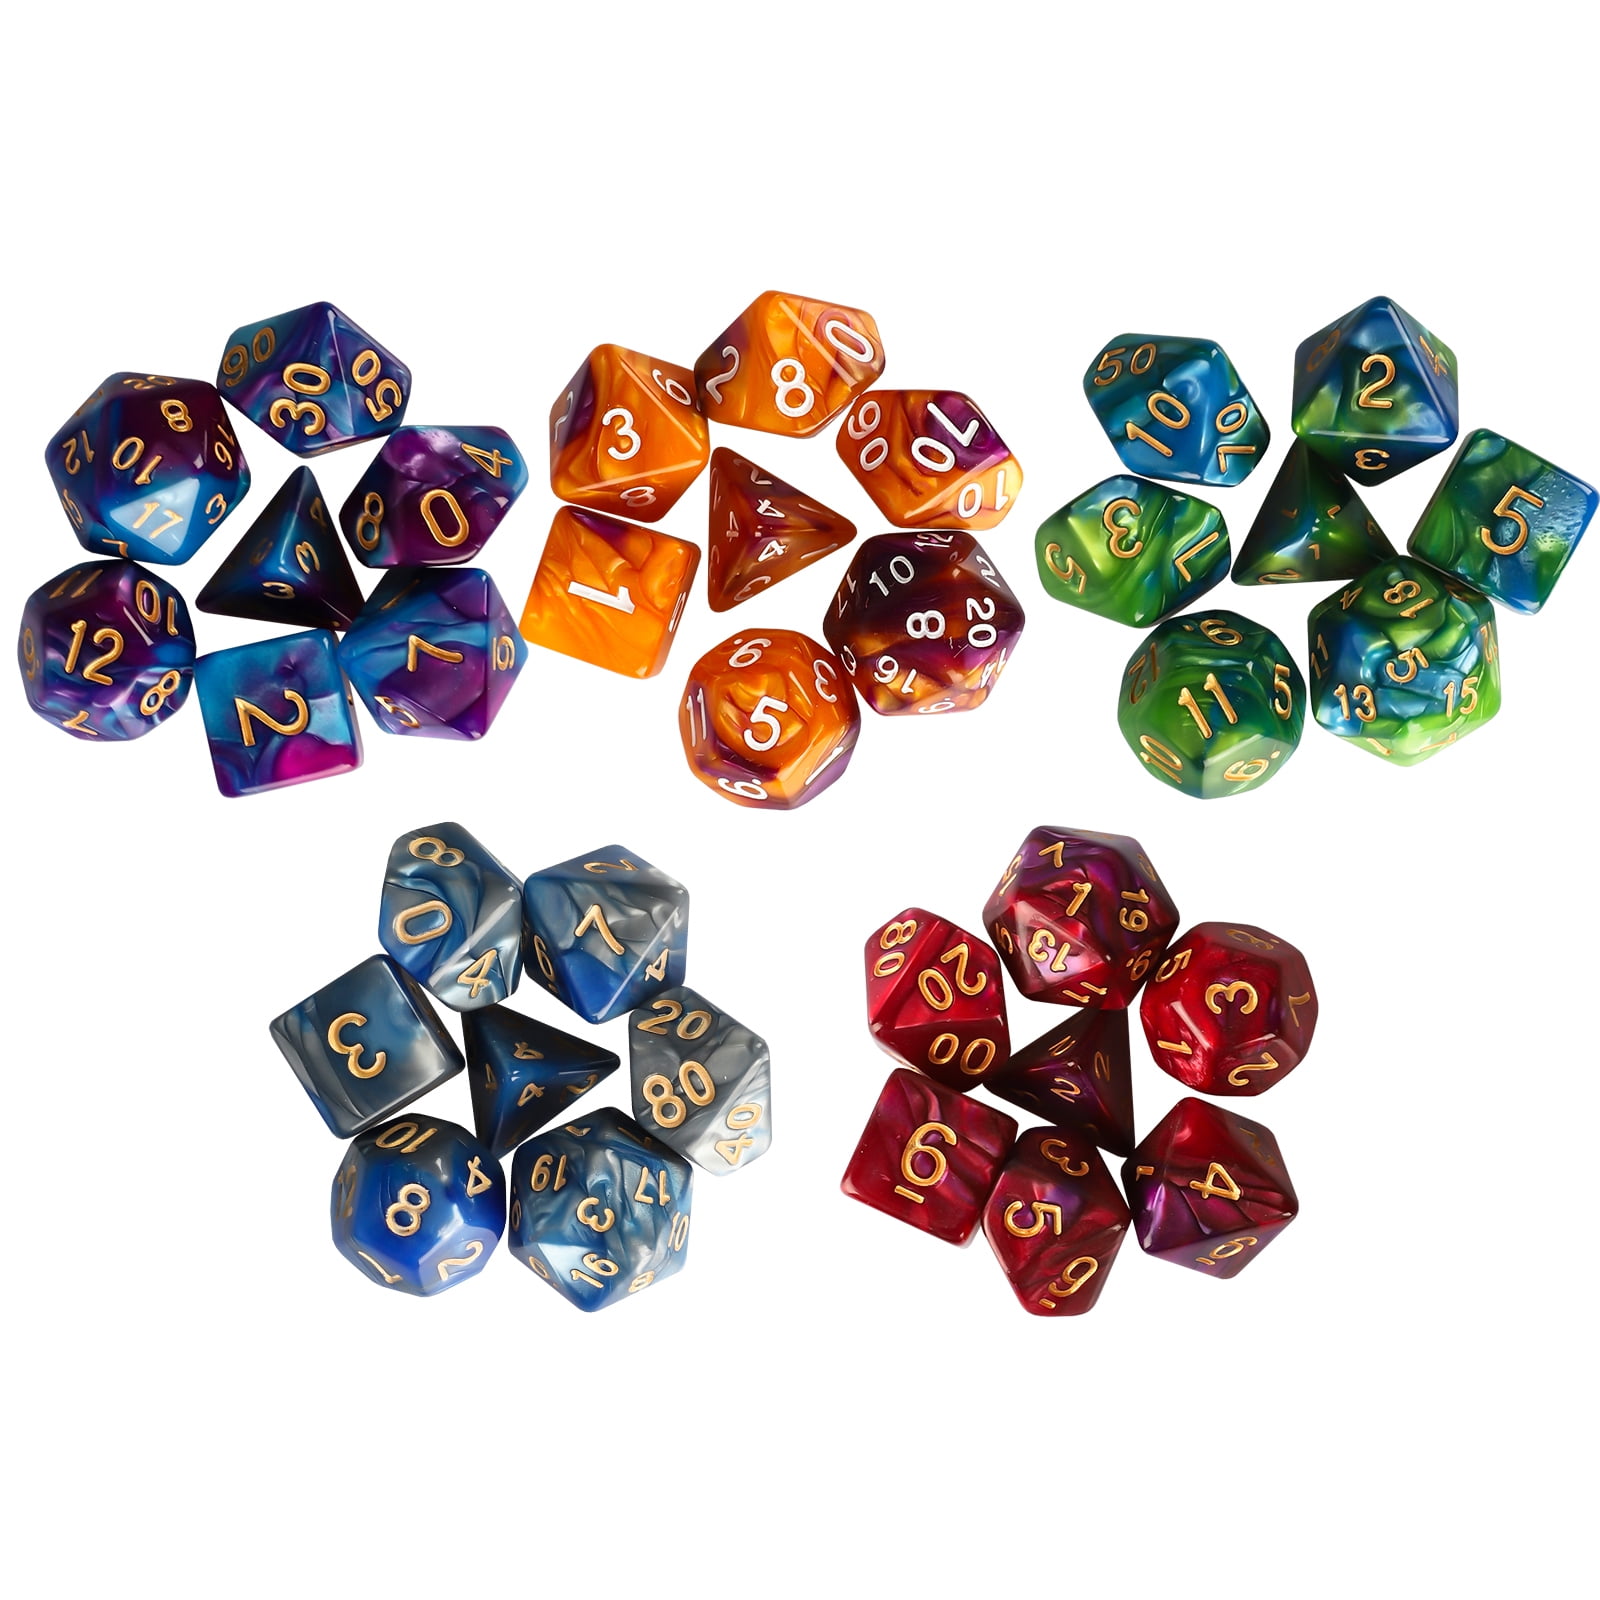 cusdie Metal Dice with Metal Box 7 PCs DND Dice for Role Playing Game Dungeons and Dragons D&D Dice MTG Pathfinder Math Teaching Polyhedral Dice Set with Dragon Font